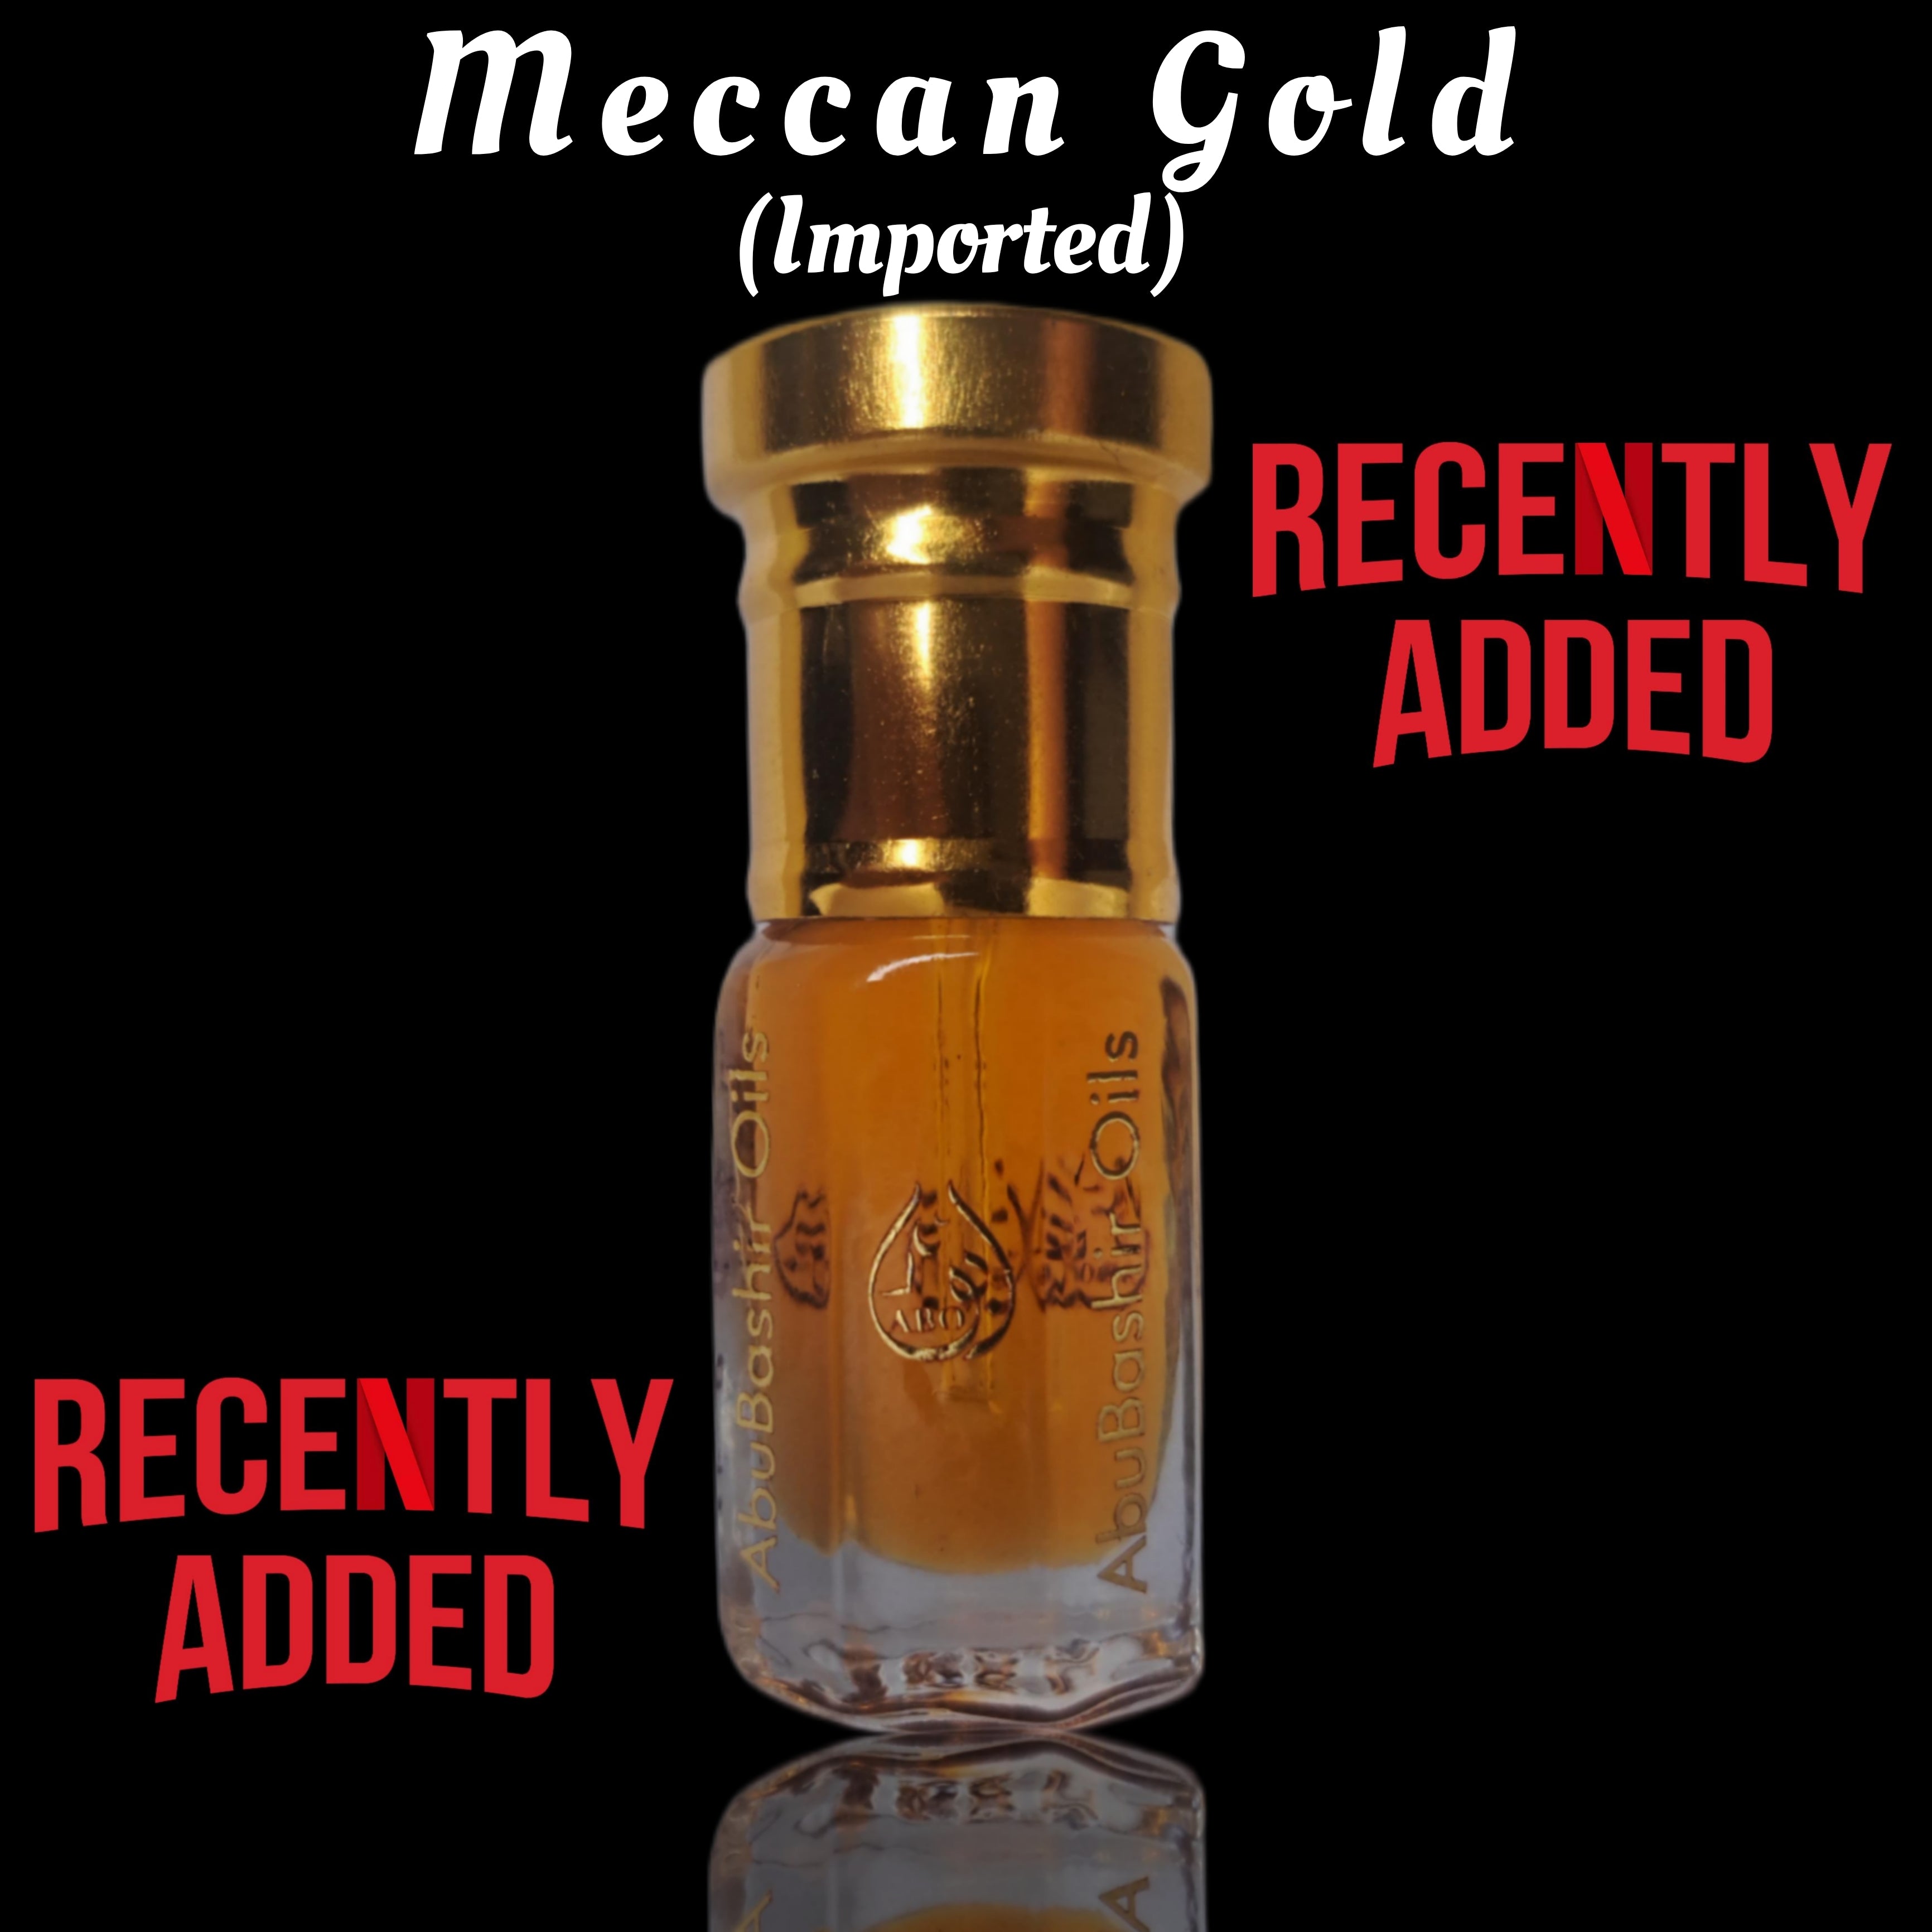 Meccan Gold